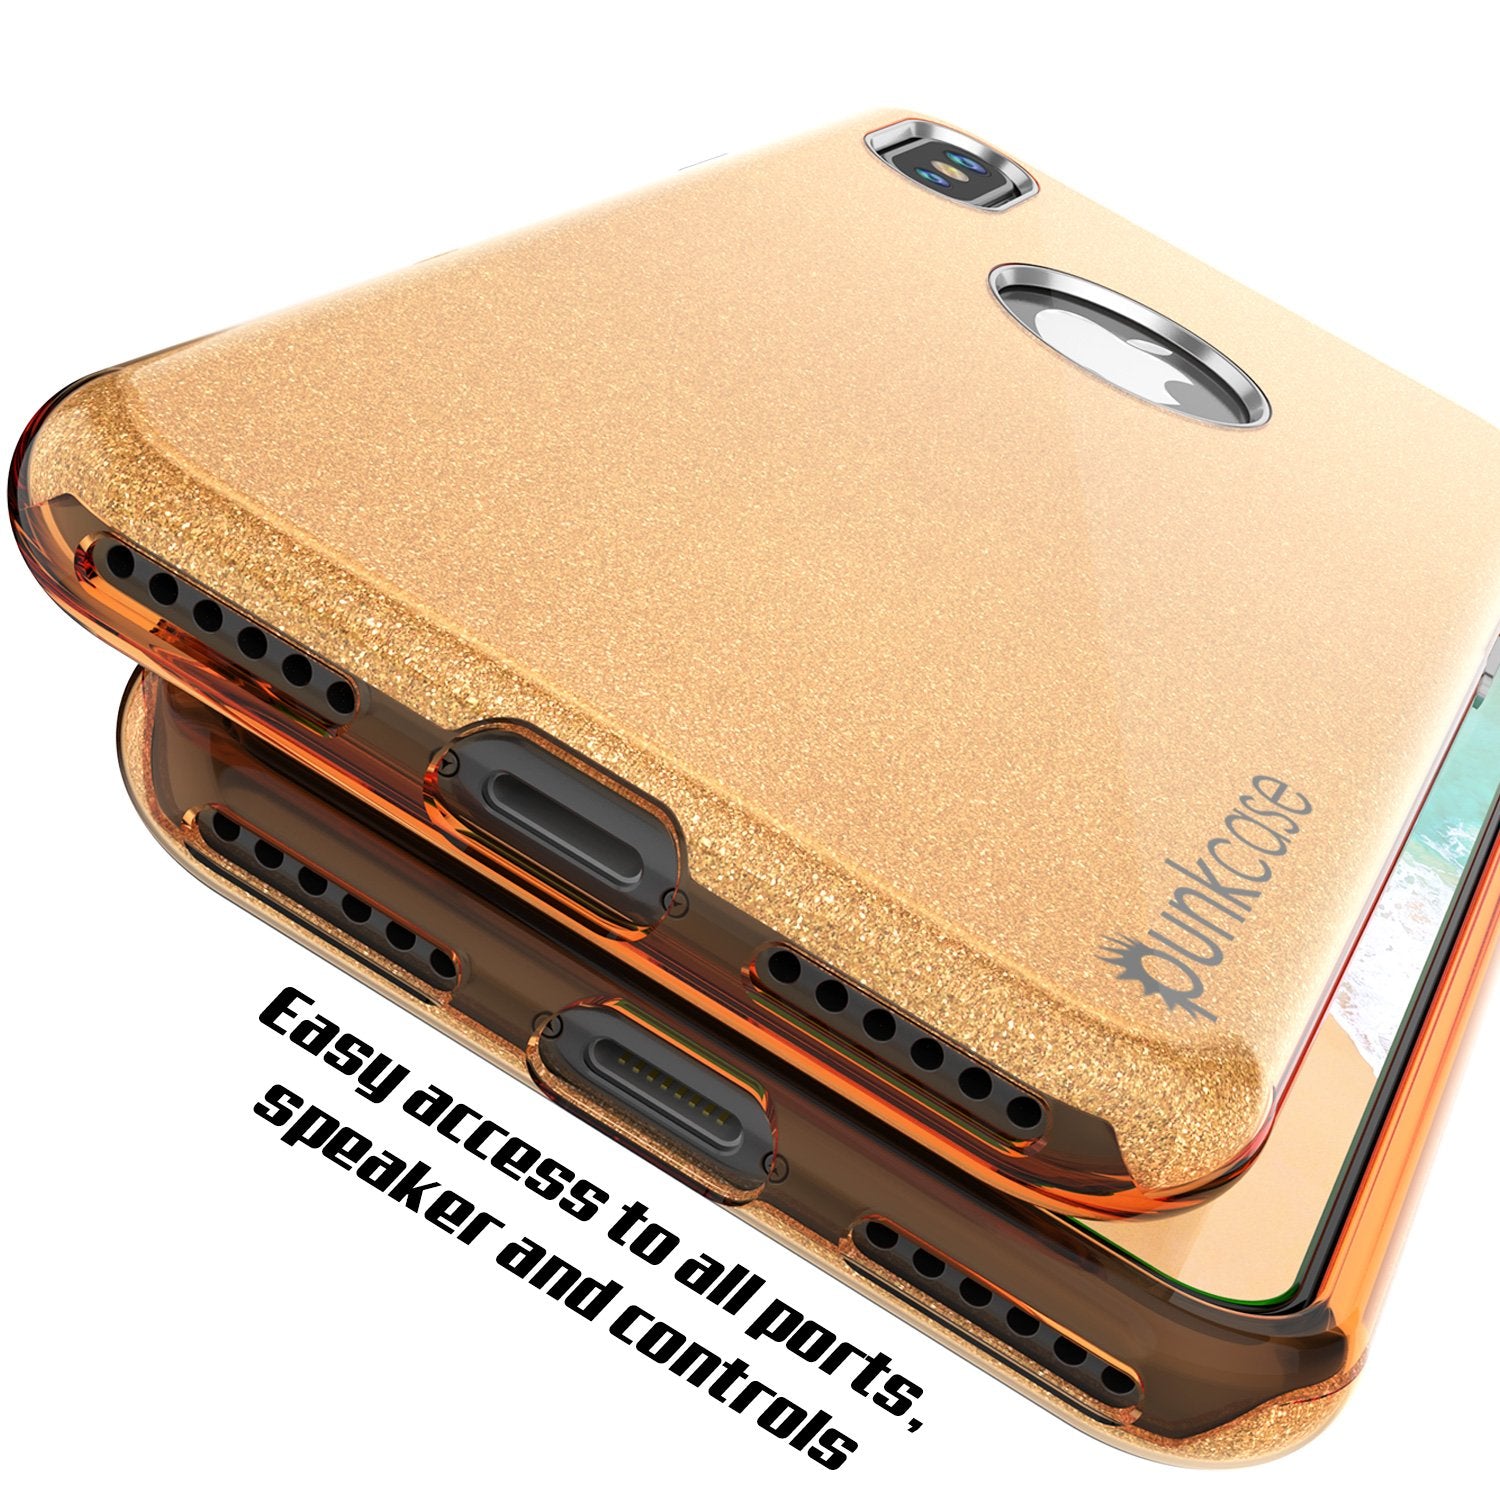 iPhone X Case, Punkcase Galactic 2.0 Series Ultra Slim w/ Tempered Glass Screen Protector | [Gold] - PunkCase NZ